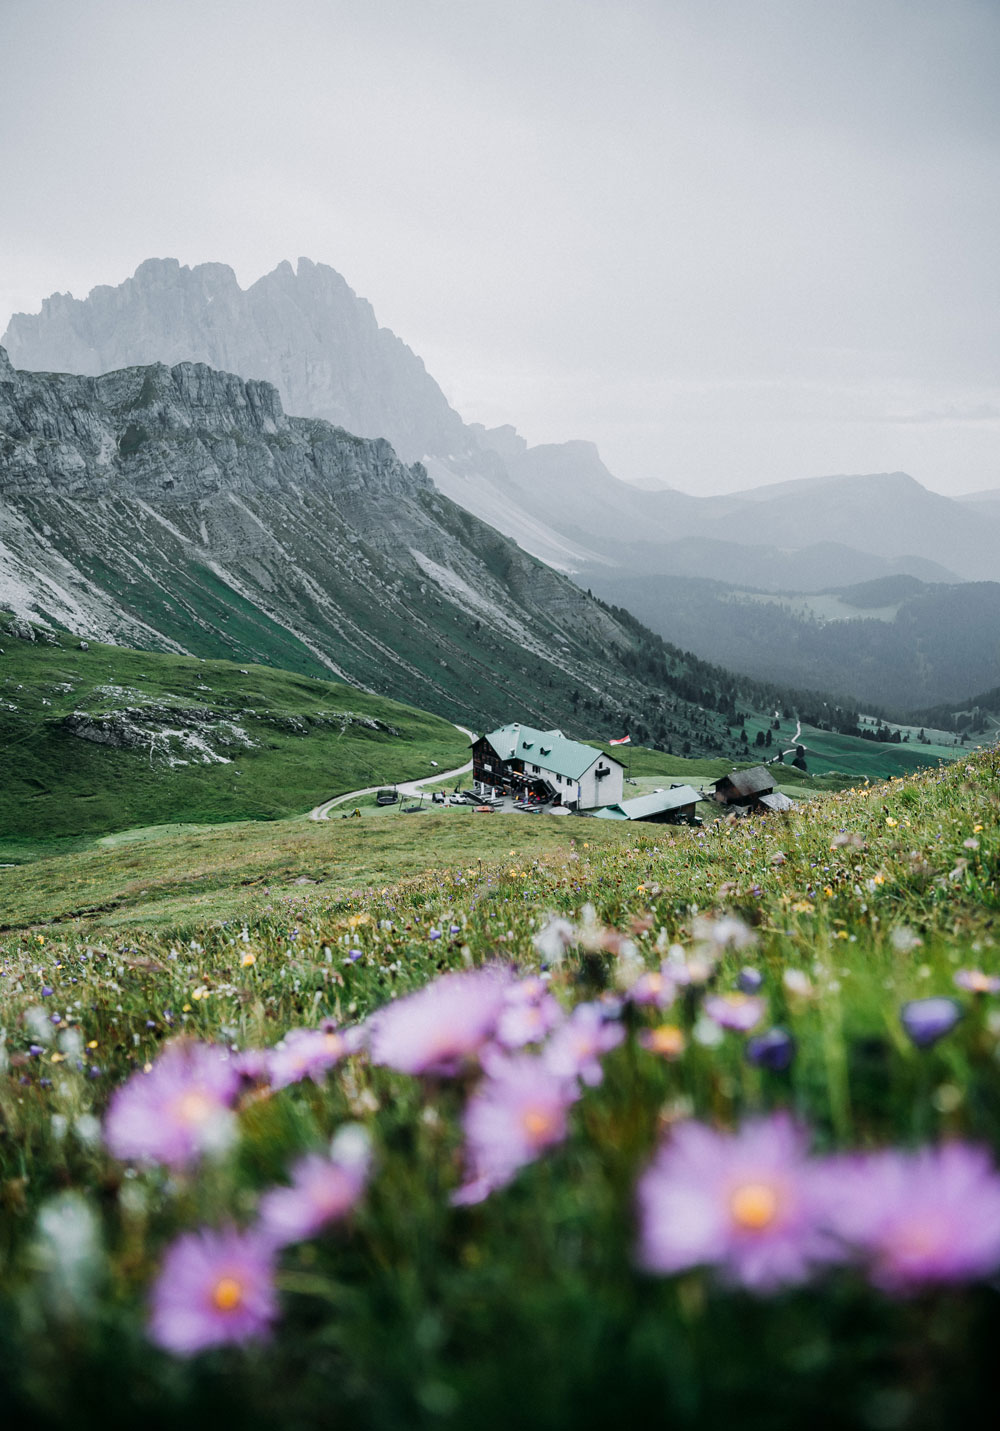 The Dolomites: A 6 days itinerary to the best photo locations